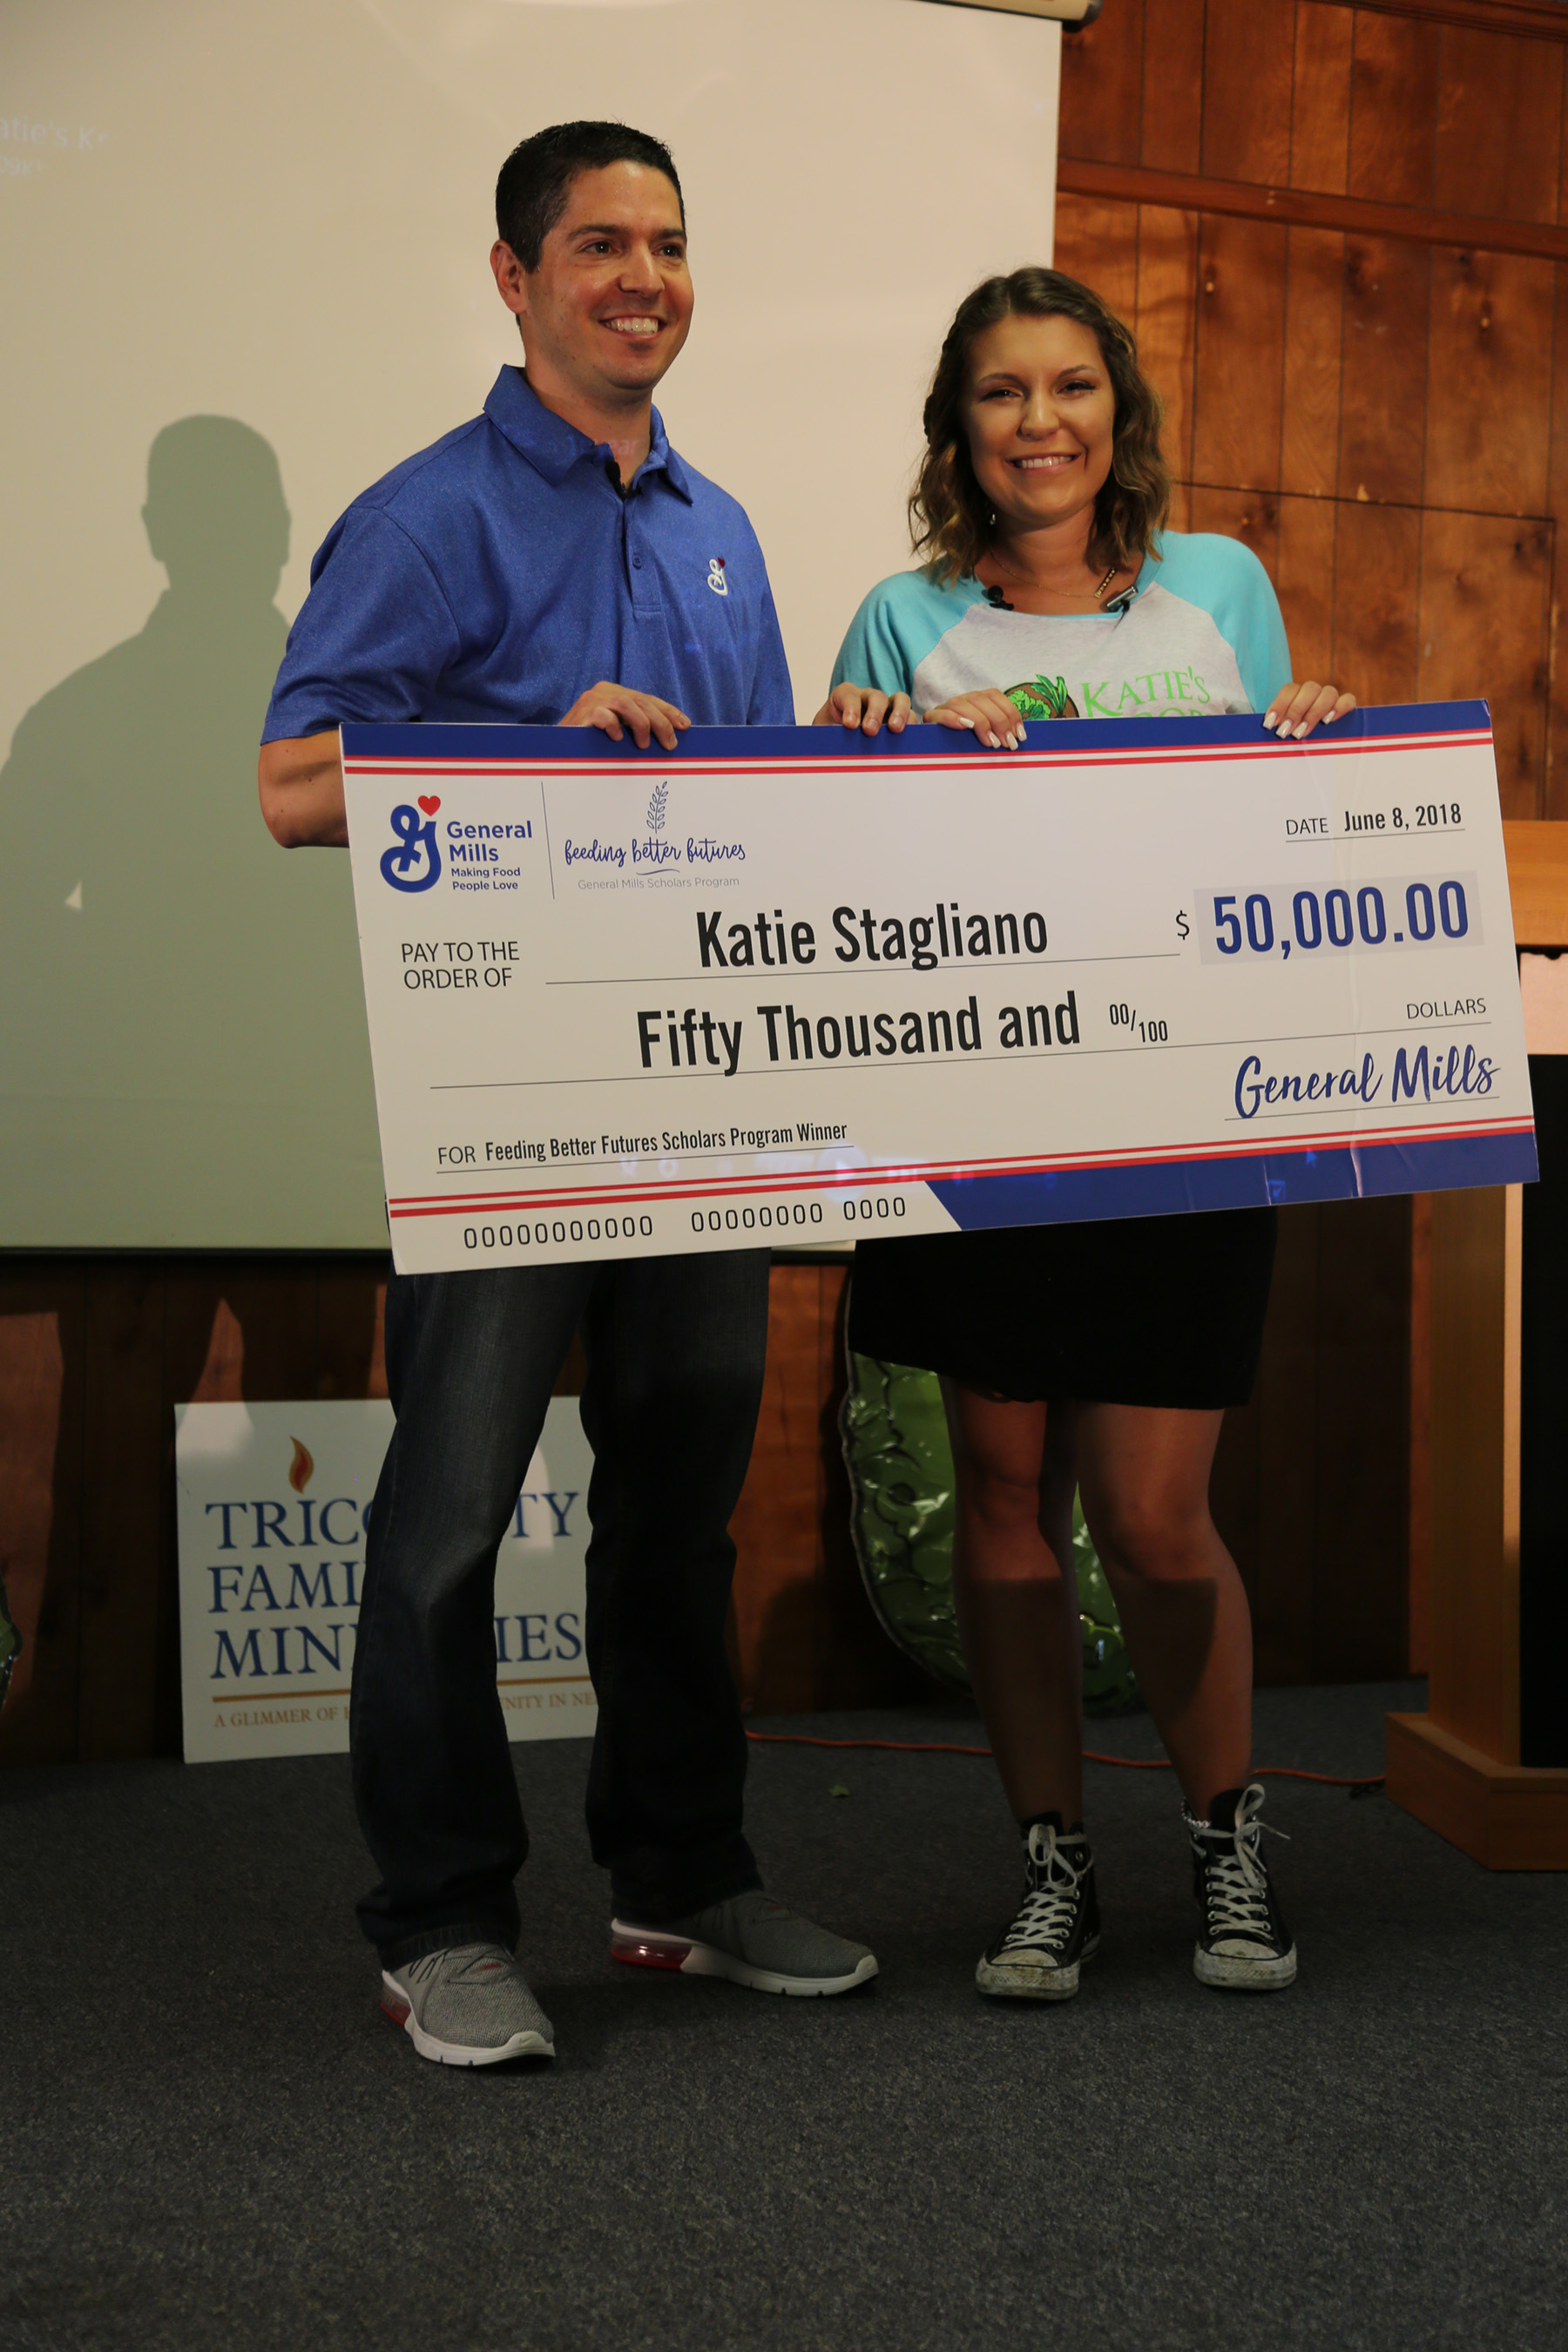 Katie Stagliano, 19-year-old founder of Katie’s Krops, awarded $50,000 as grand prize winner of the General Mills Feeding Better Futures Scholars program